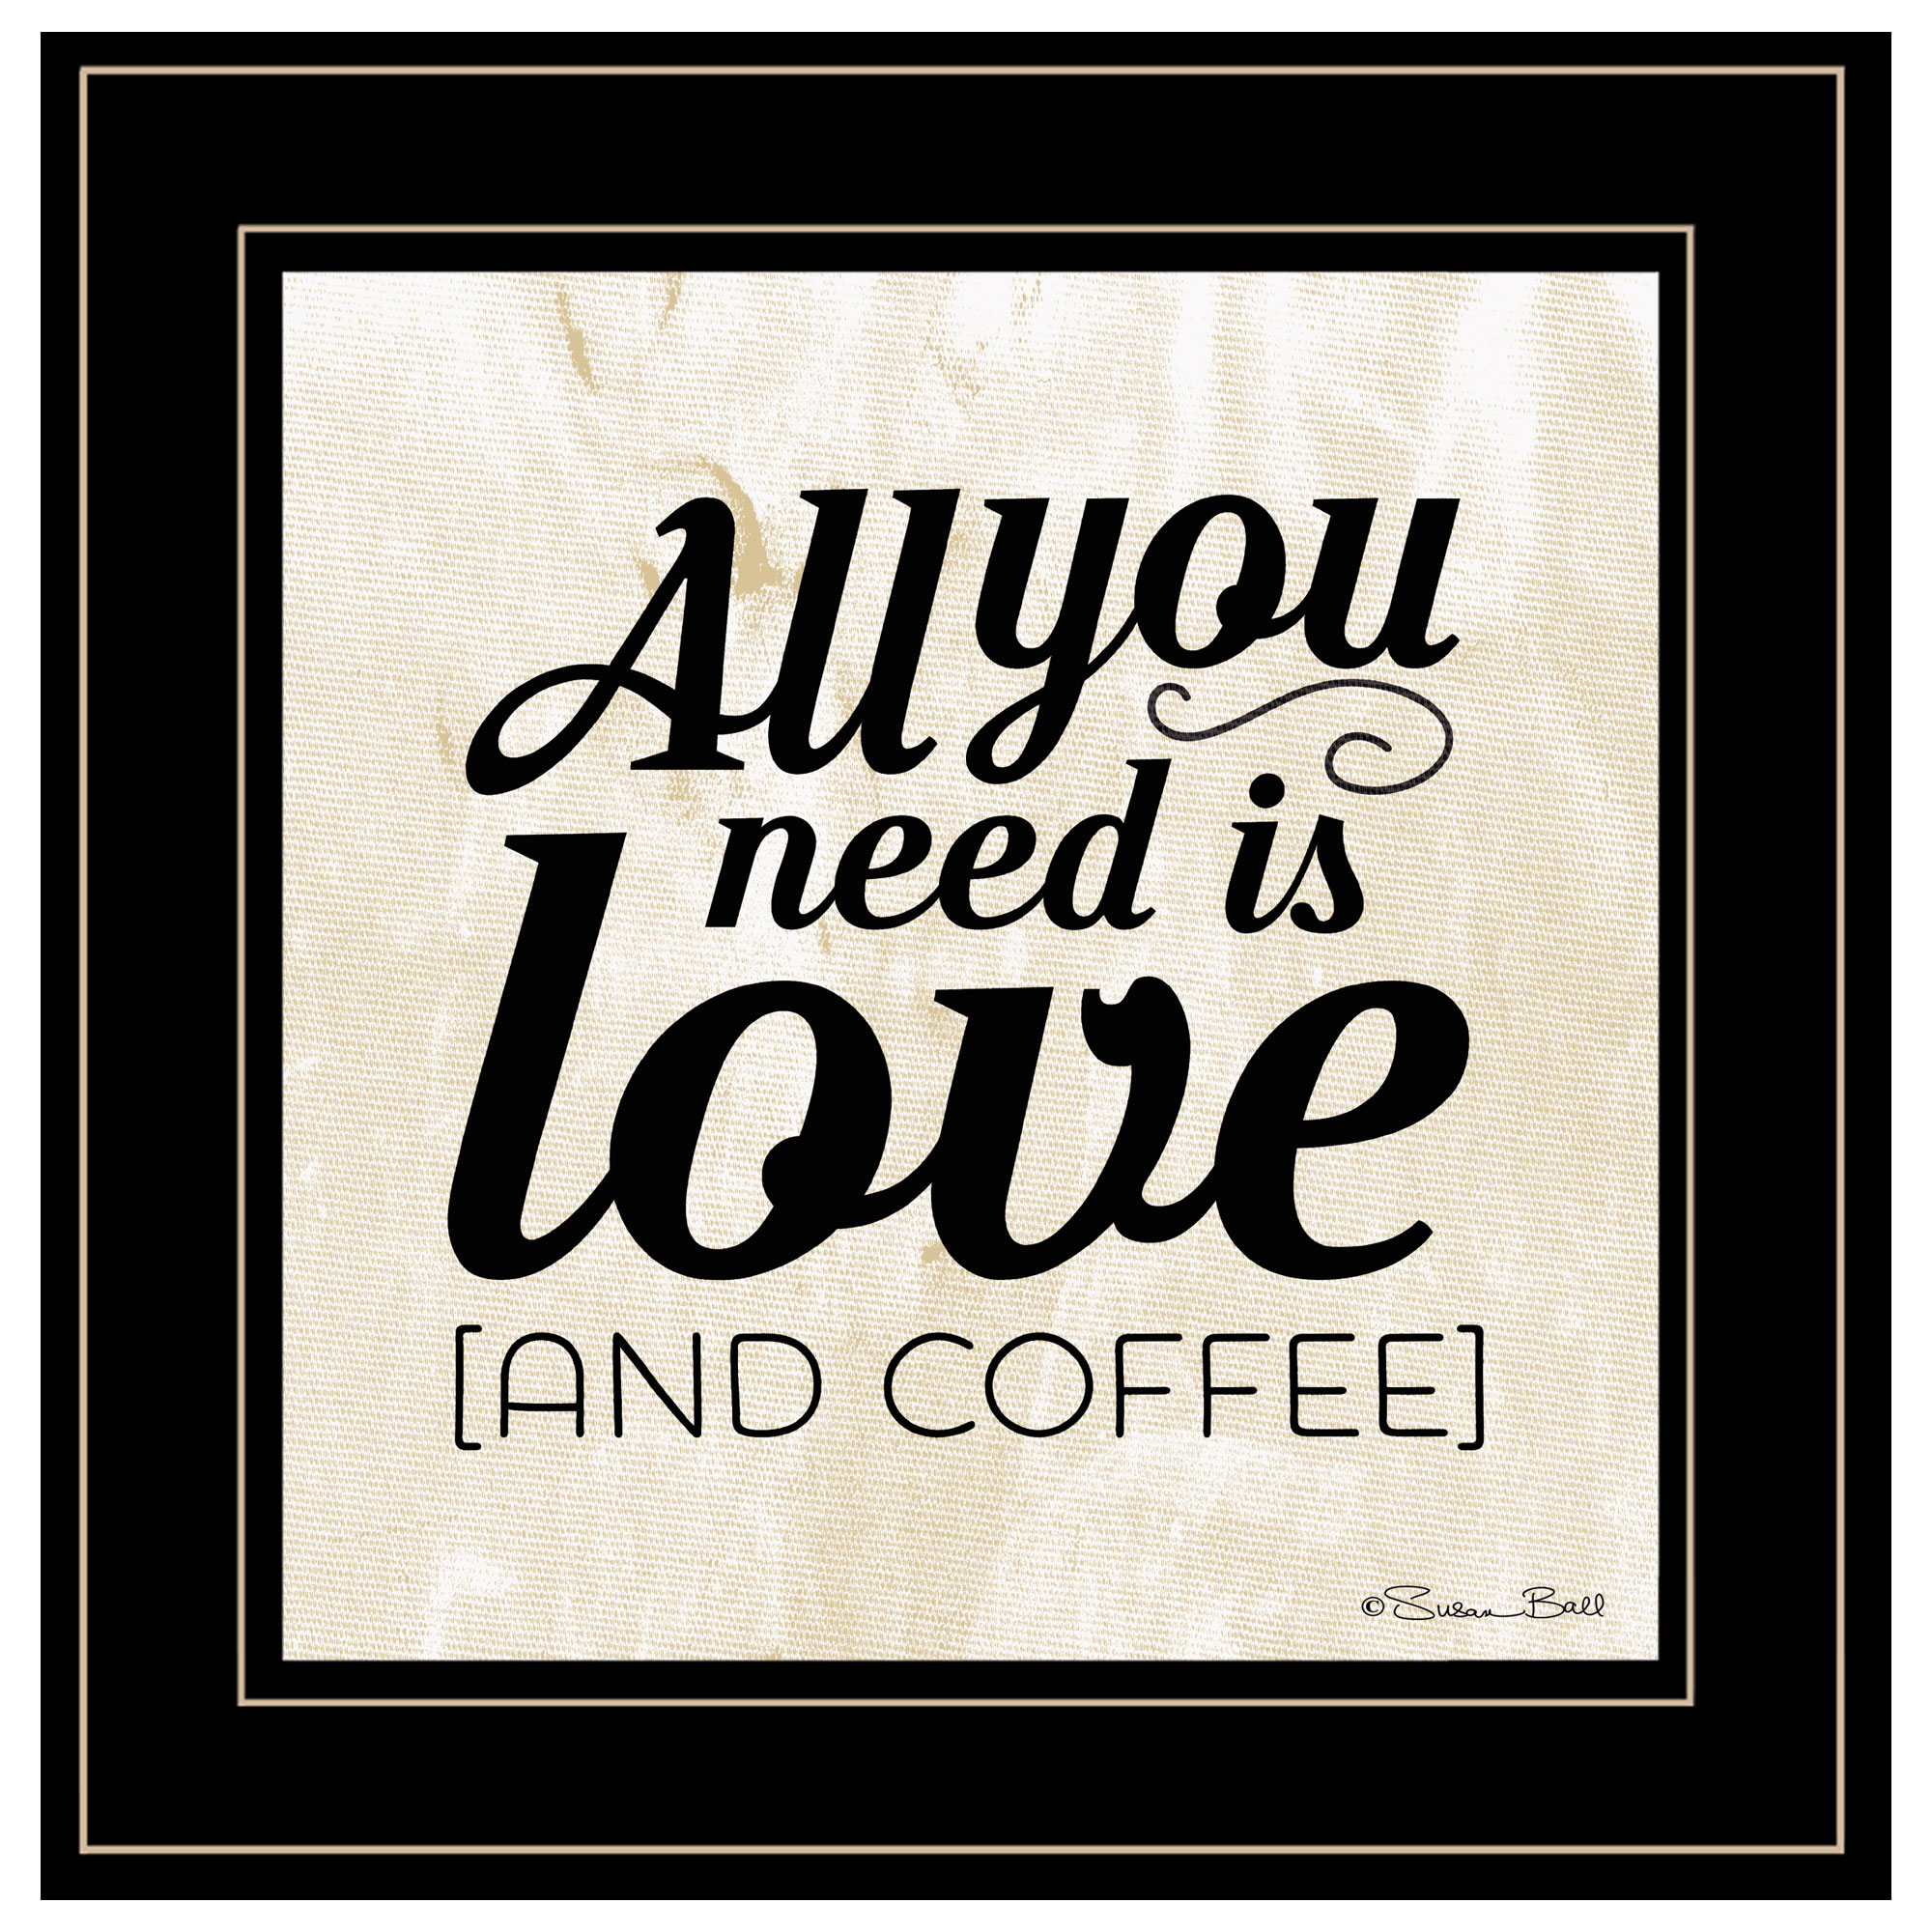 "All You Need is Love and Coffee" by Susan Ball, Ready to Hang Framed Print, Black Frame